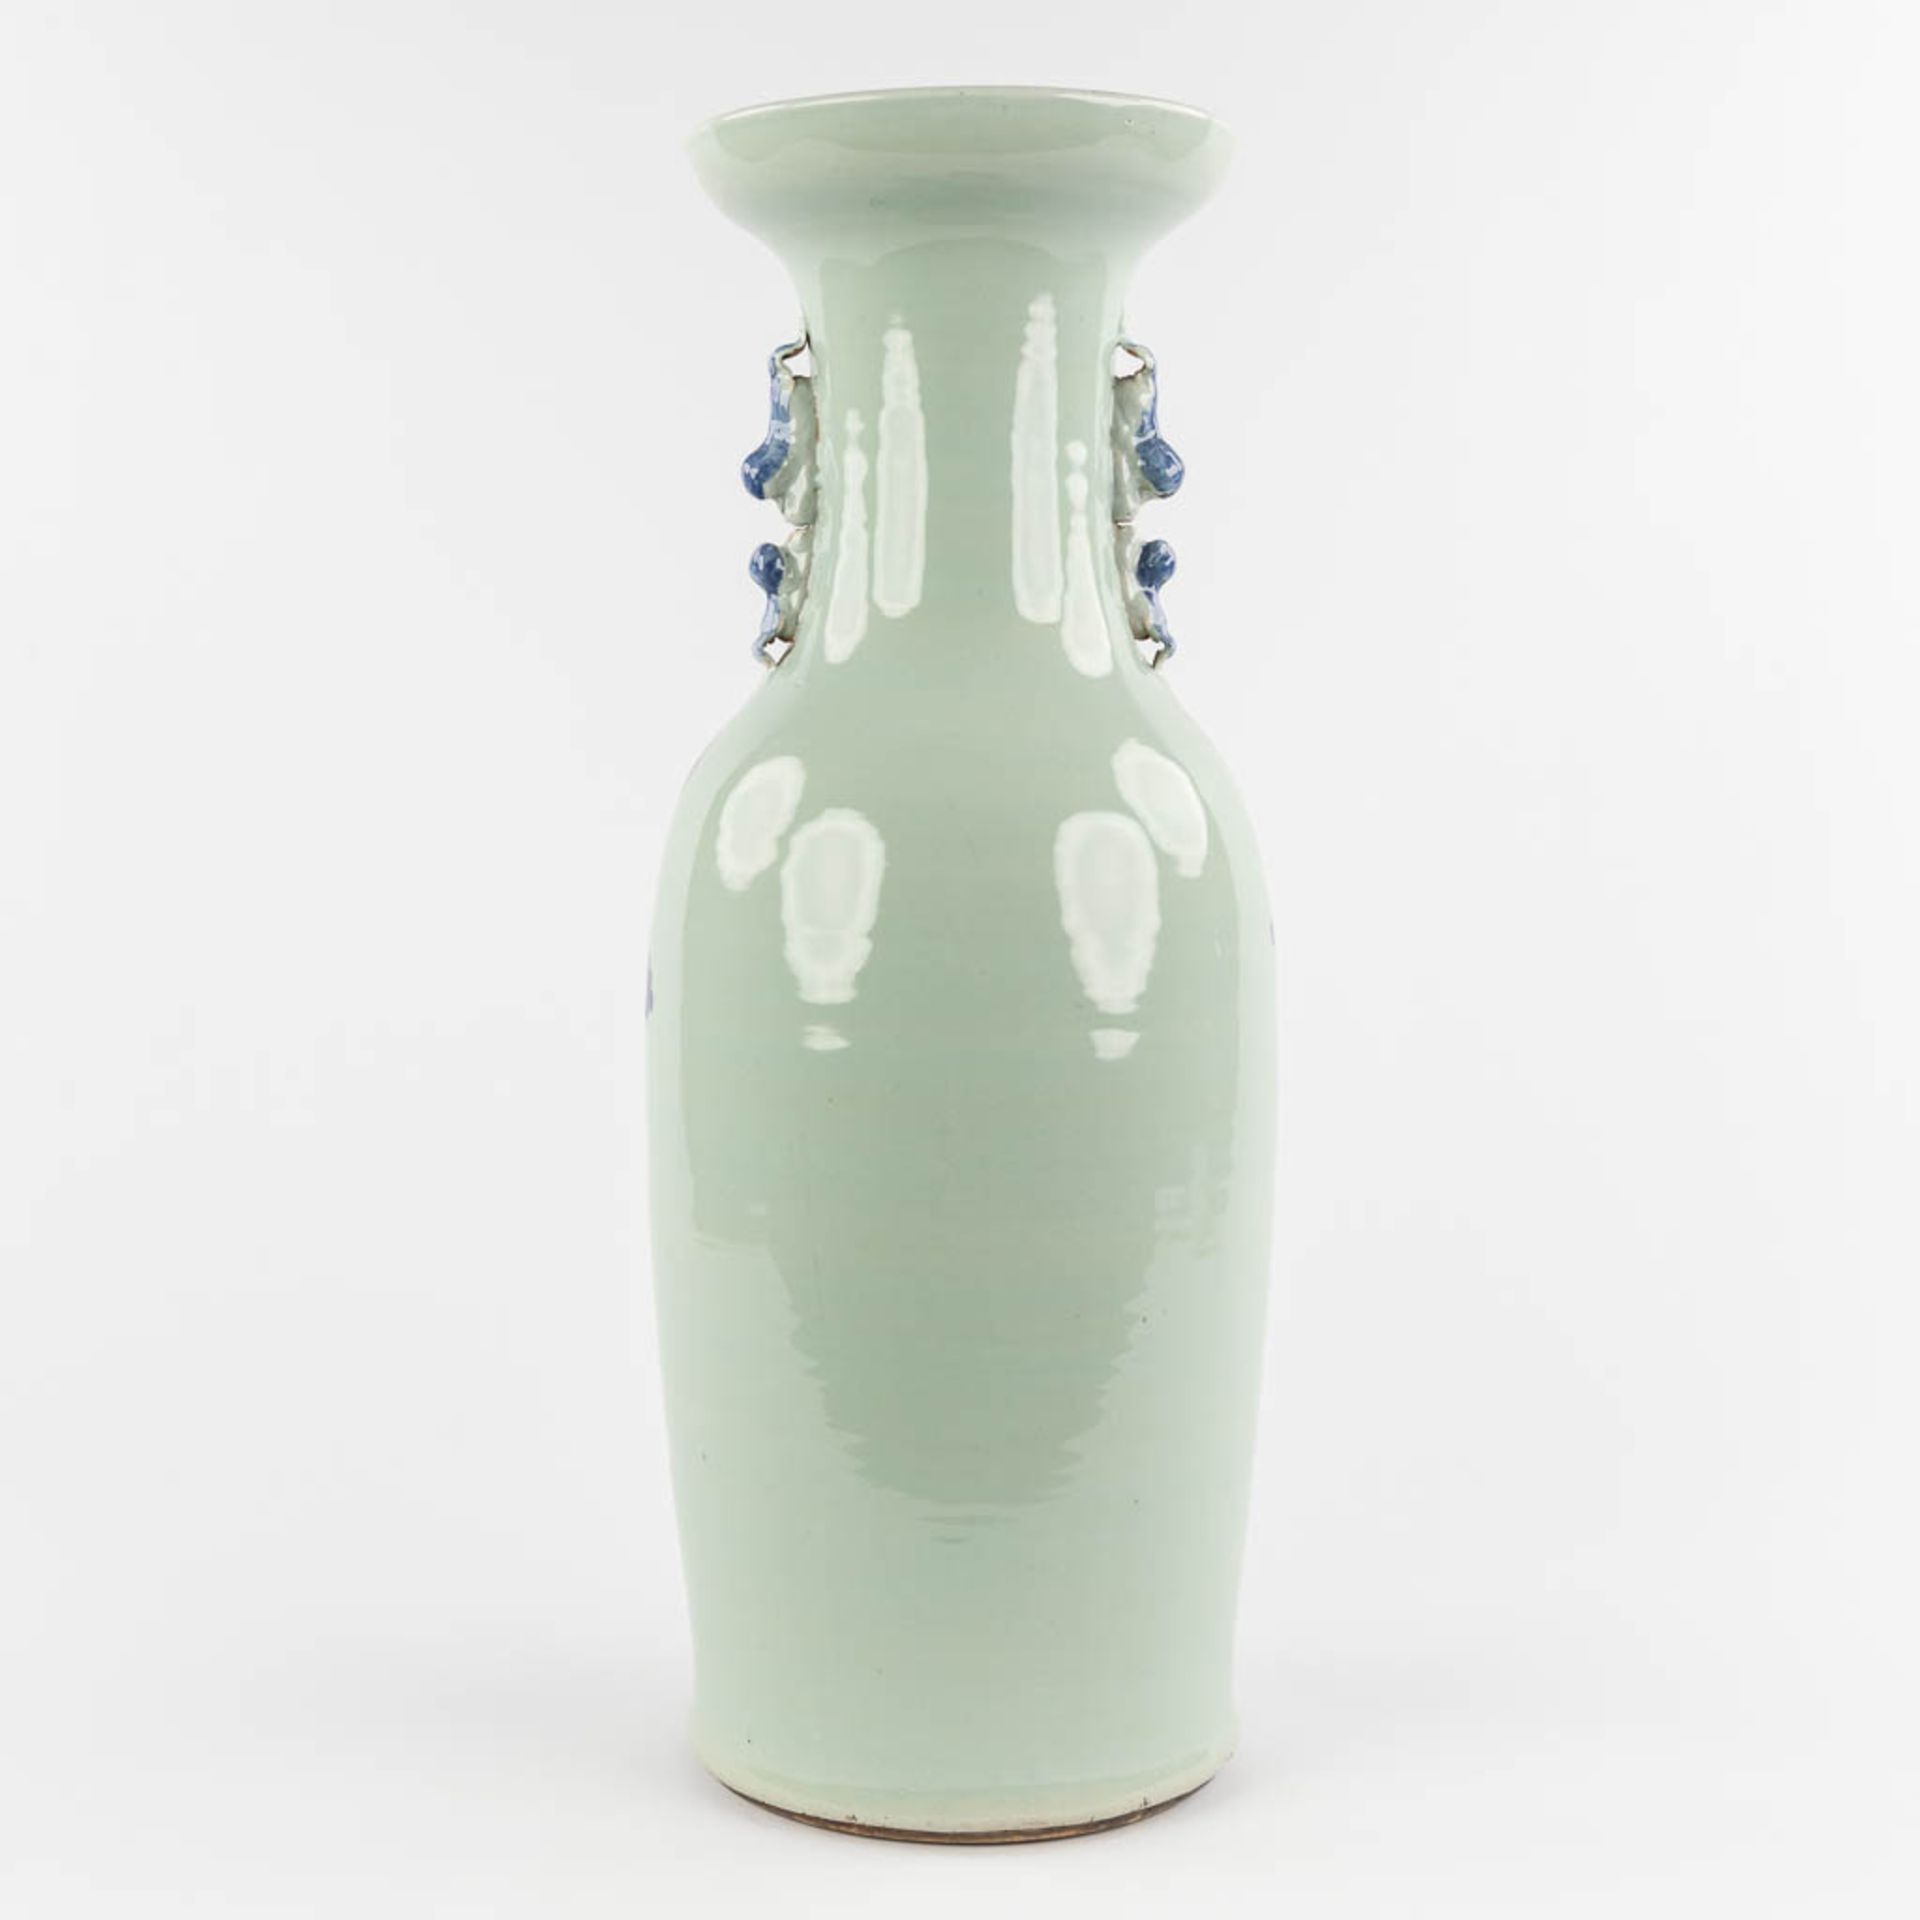 A Chinese Celadon vase with floral decor. 19th/20th C. (H:59 x D:21 cm) - Image 5 of 11